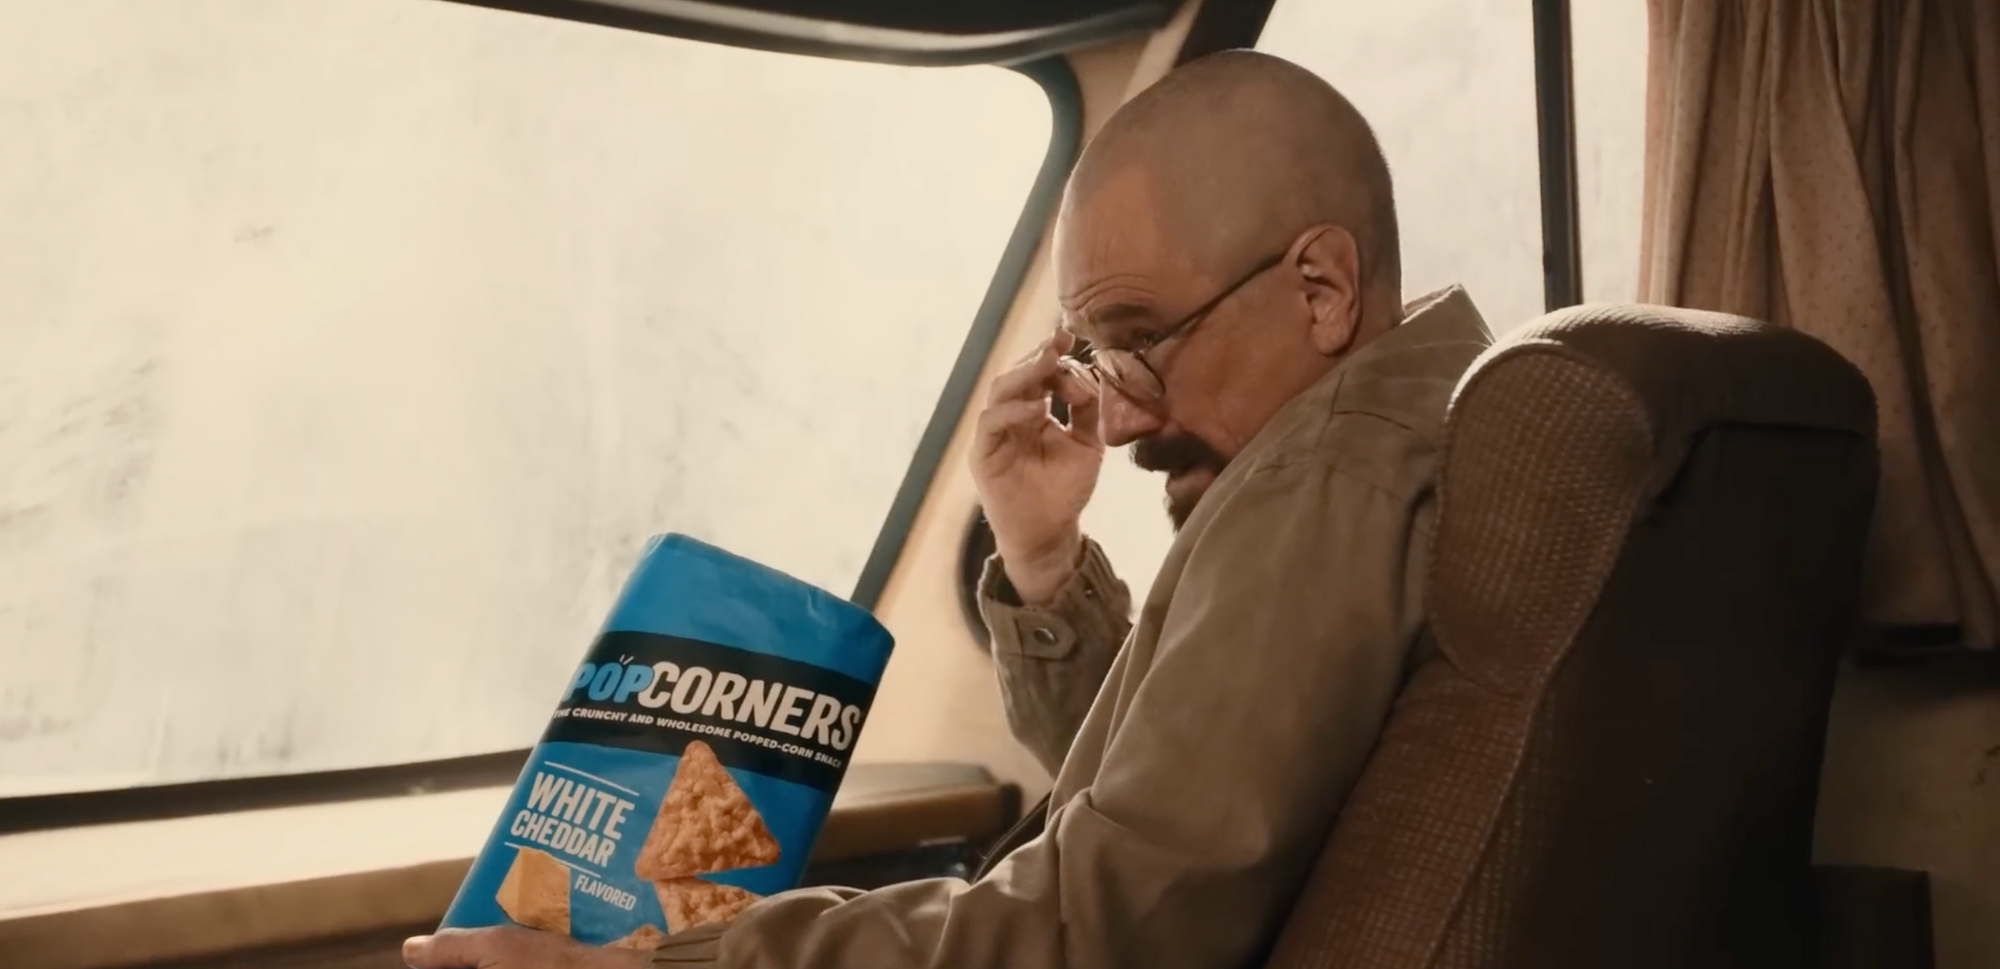 M&M's 'Bad Passengers' is Most Engaging Ad of Super Bowl 2019